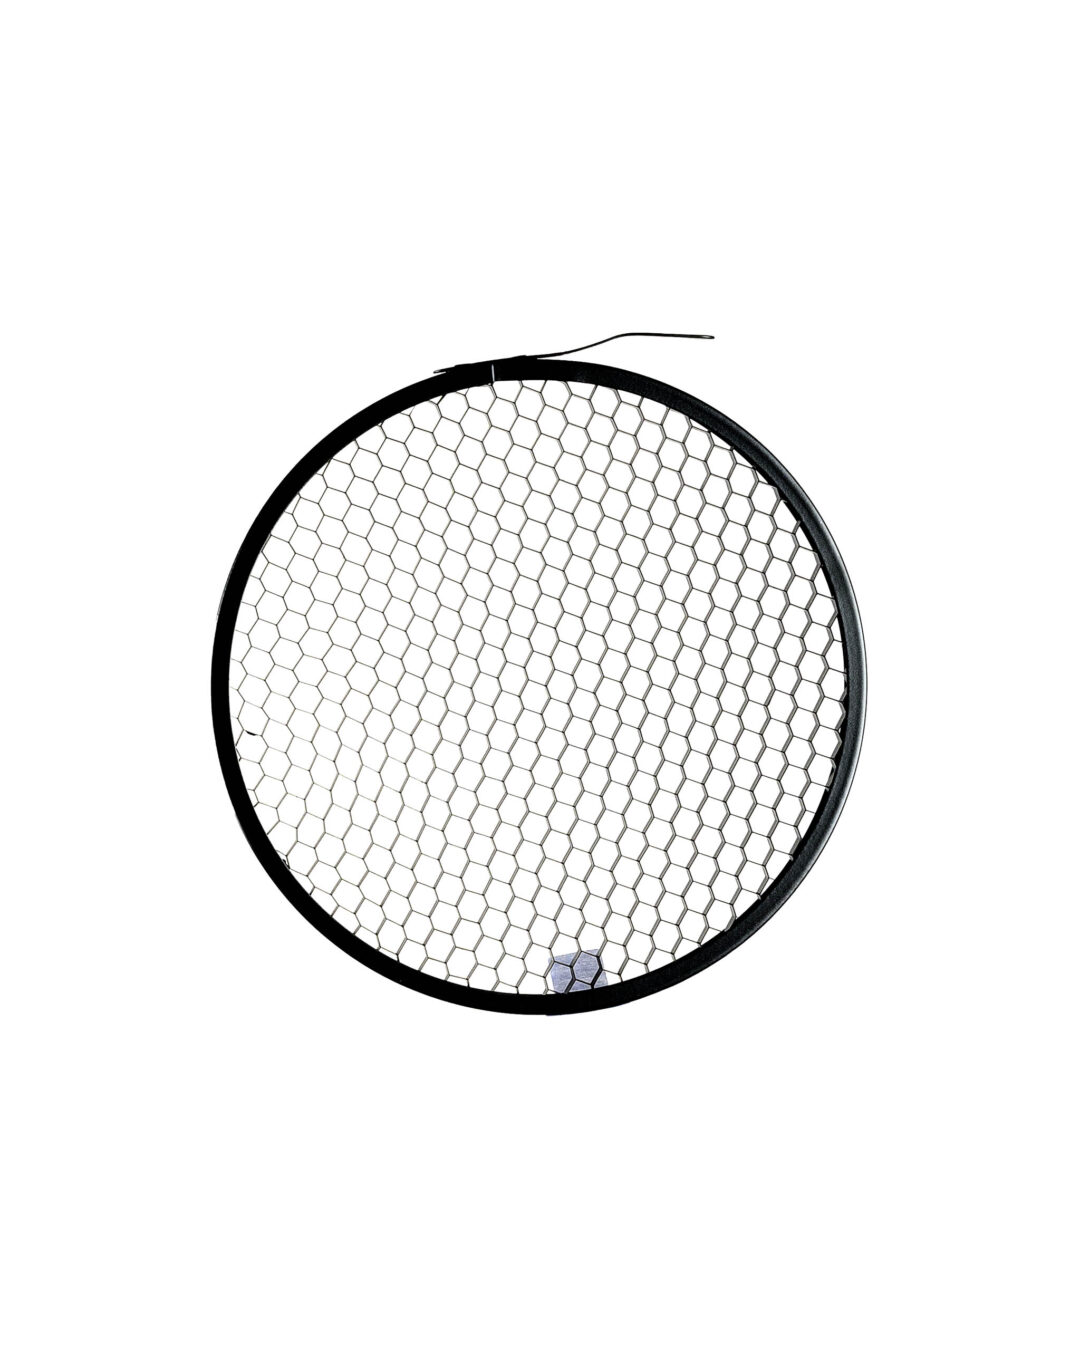 AX-EI-HG-060 AriesX 60 degree Photo Video Honeycomb Grid for 7 inch Reflector